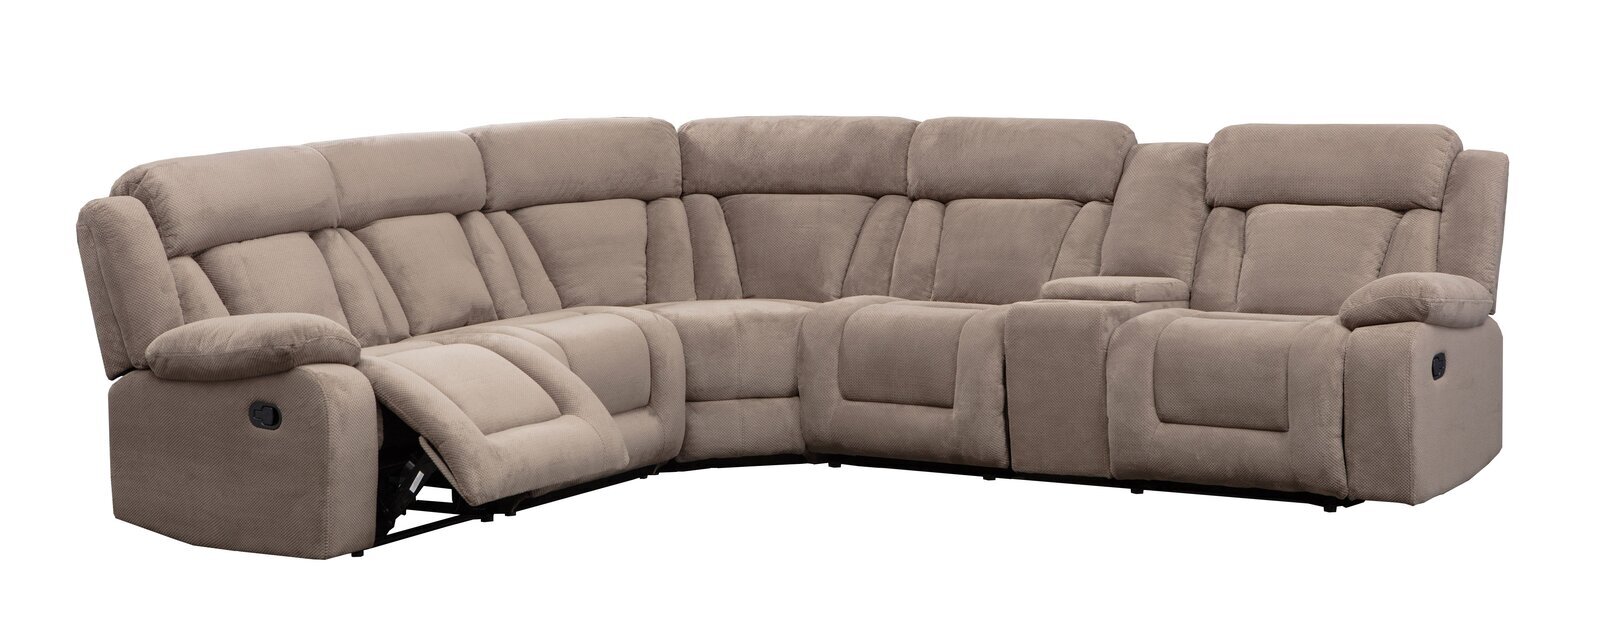 Herald Square Symmetrical Reclining Corner Sectional